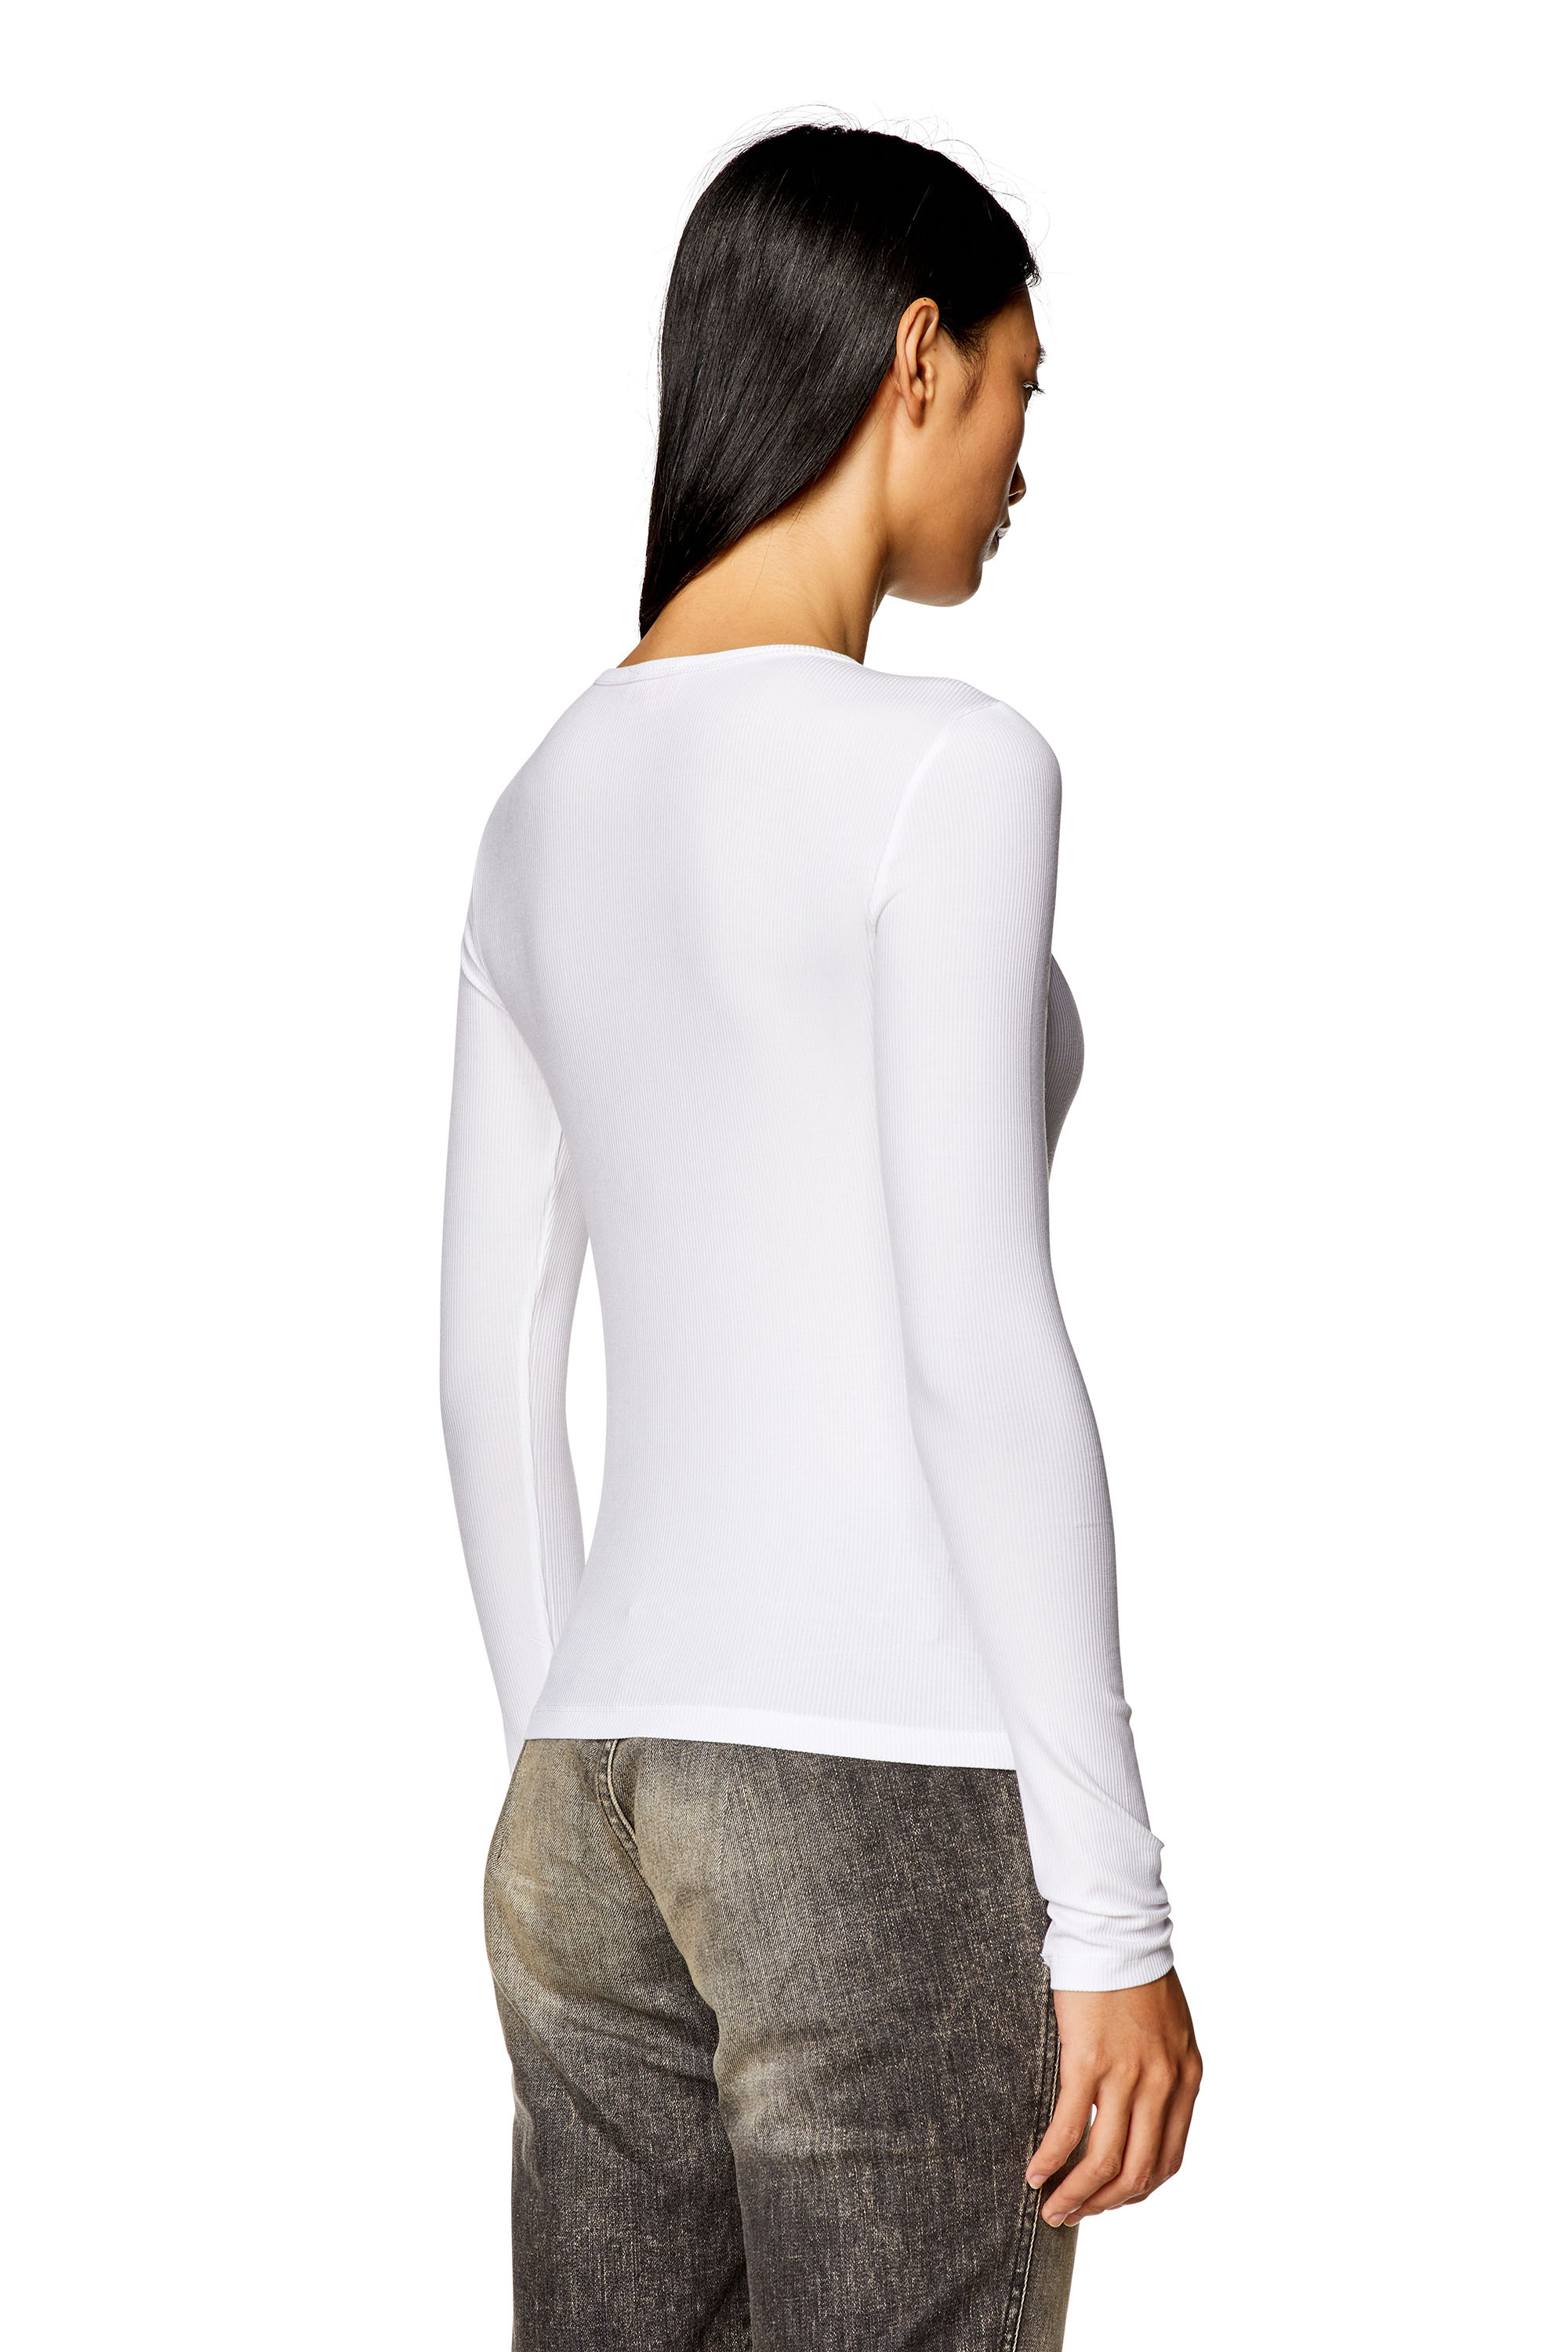 Diesel - T-MATIC-LS, Woman Long-sleeve top with chain necklace in White - Image 3